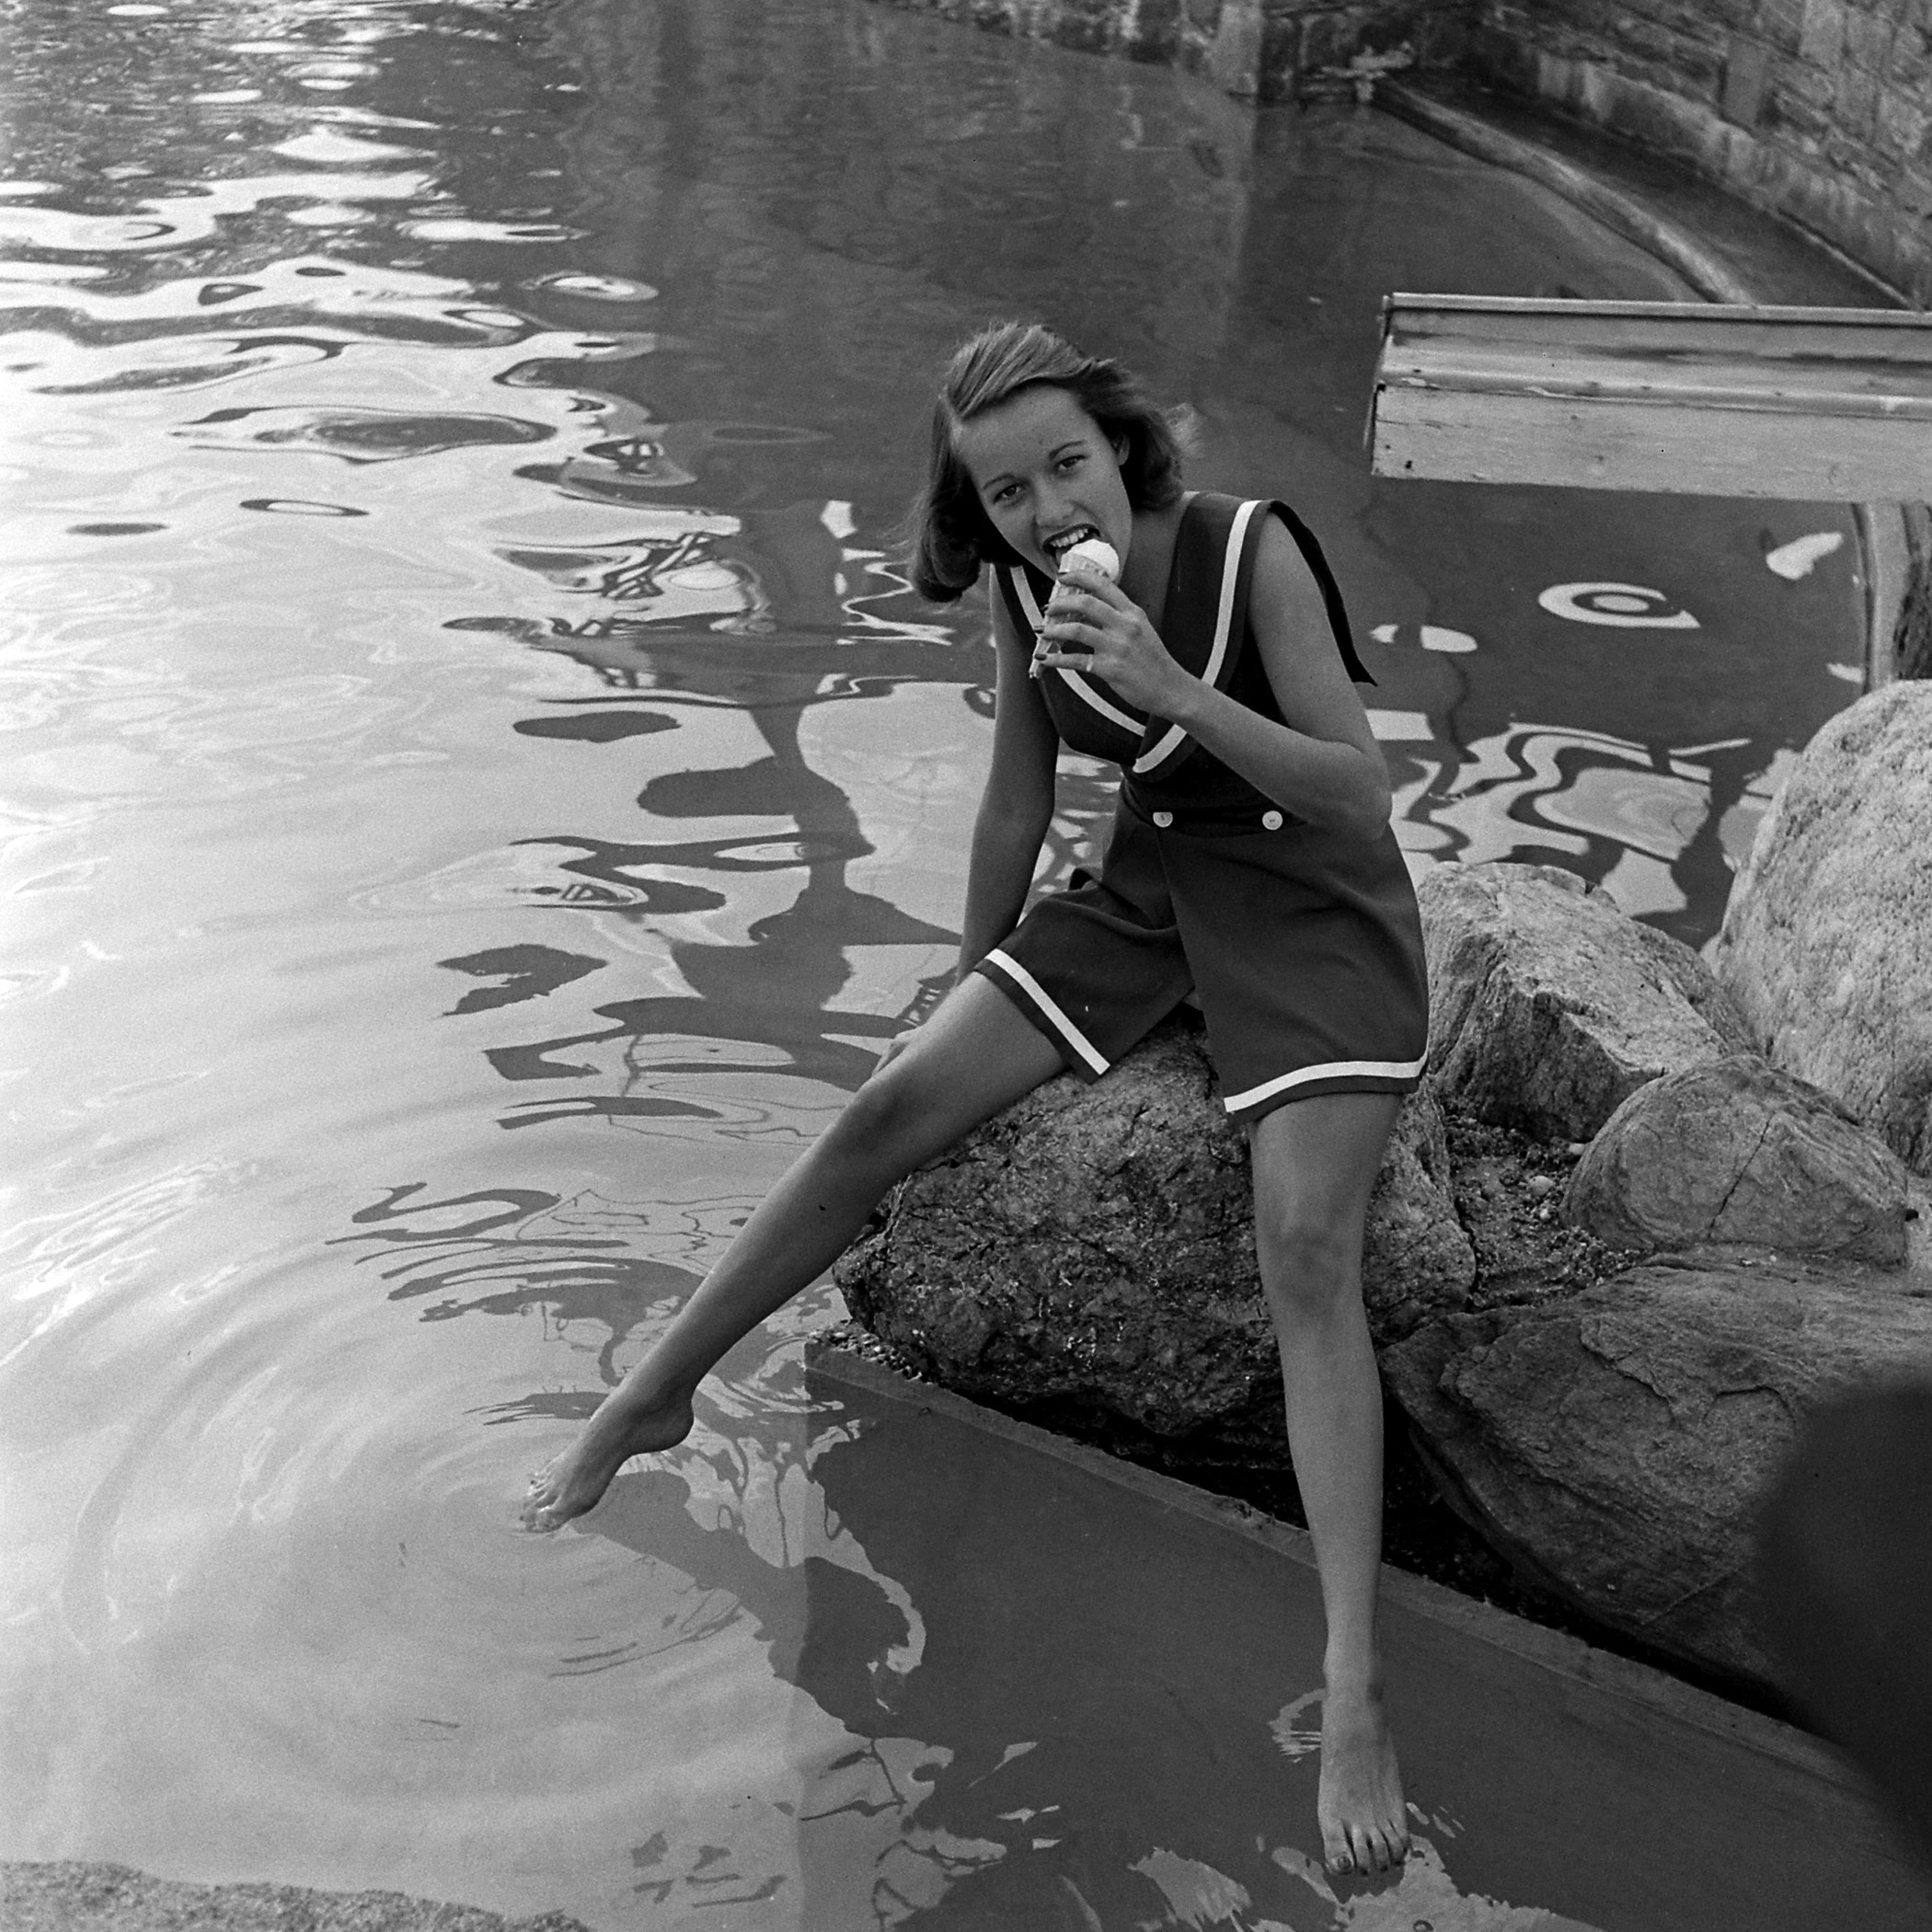 Bathing suit model eating ice cream by a lake, 1946.